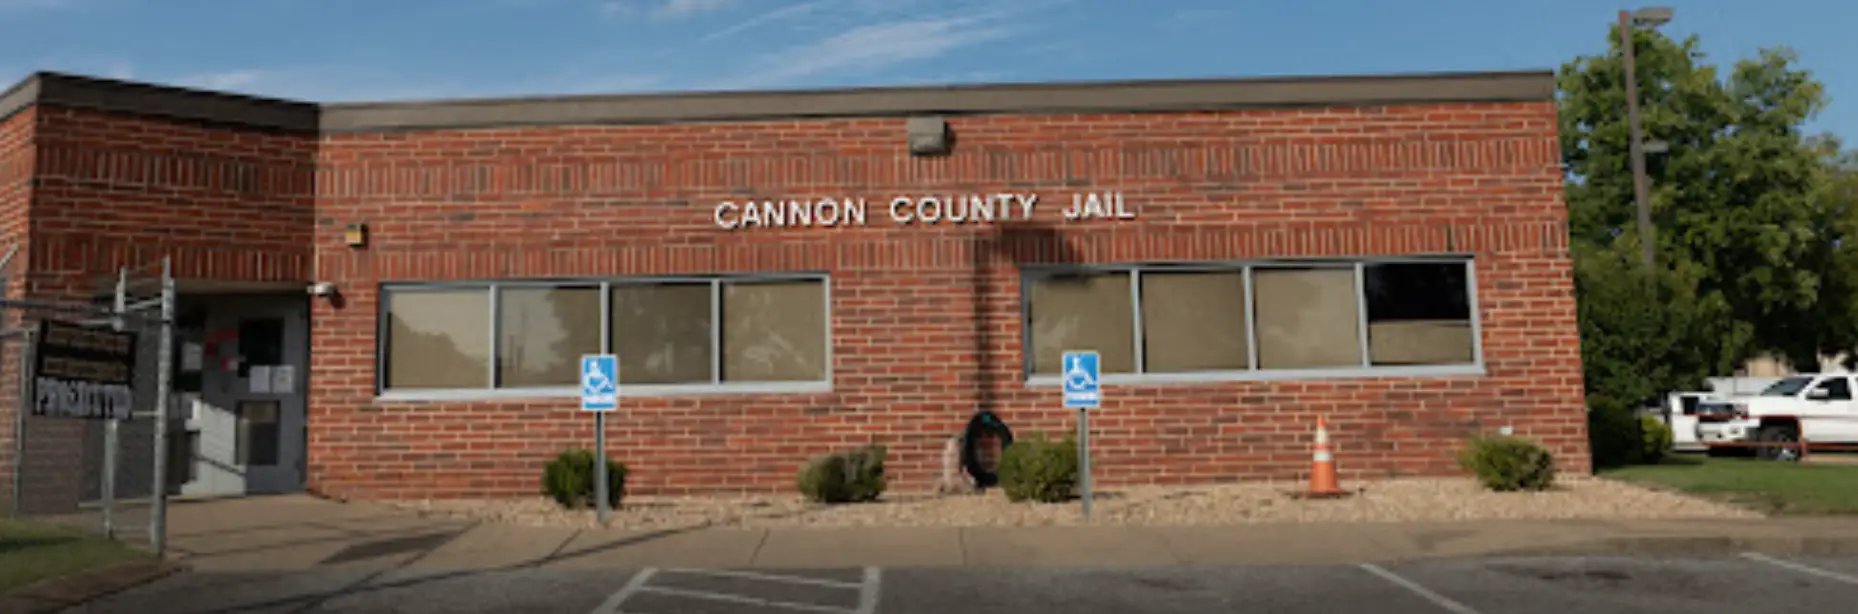 Photos Cannon County Jail & Sheriff 1